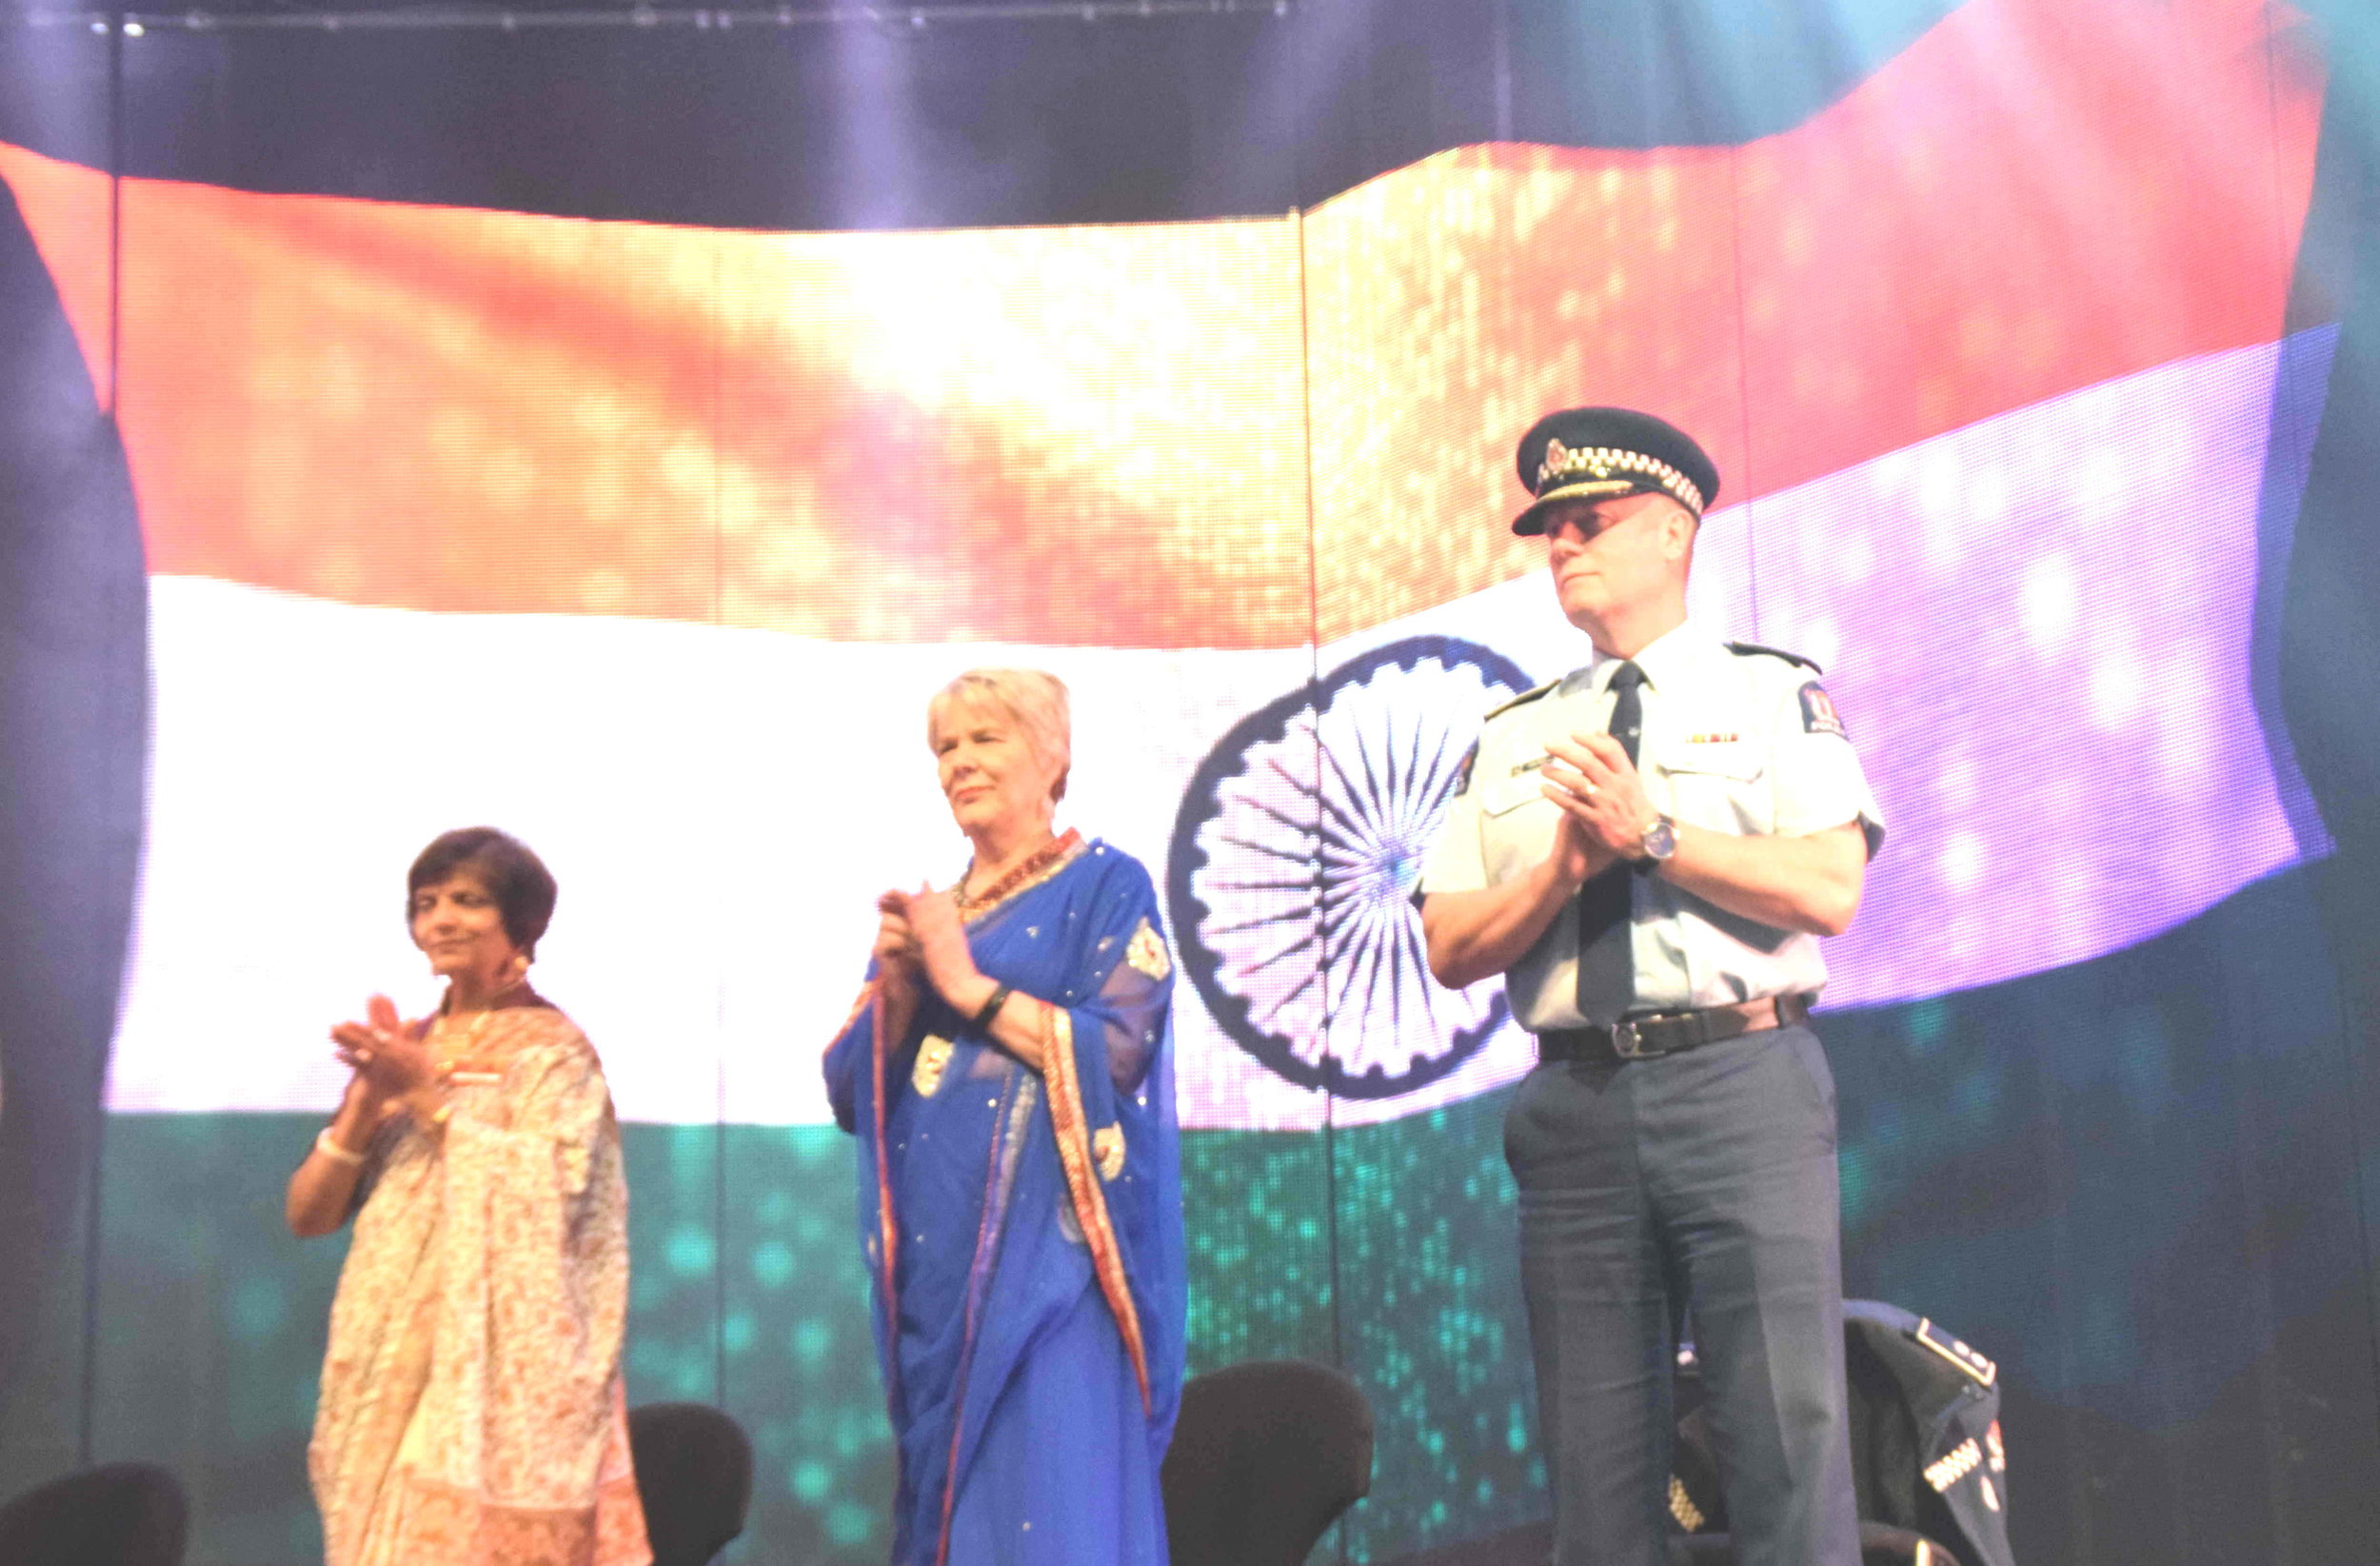  Minister Nicky Wagner, wearing a traditional Indian saree (in the middle), with Nalini Rama (one of the theming directors of the event), and Canterbury Police's District Commander John Price   